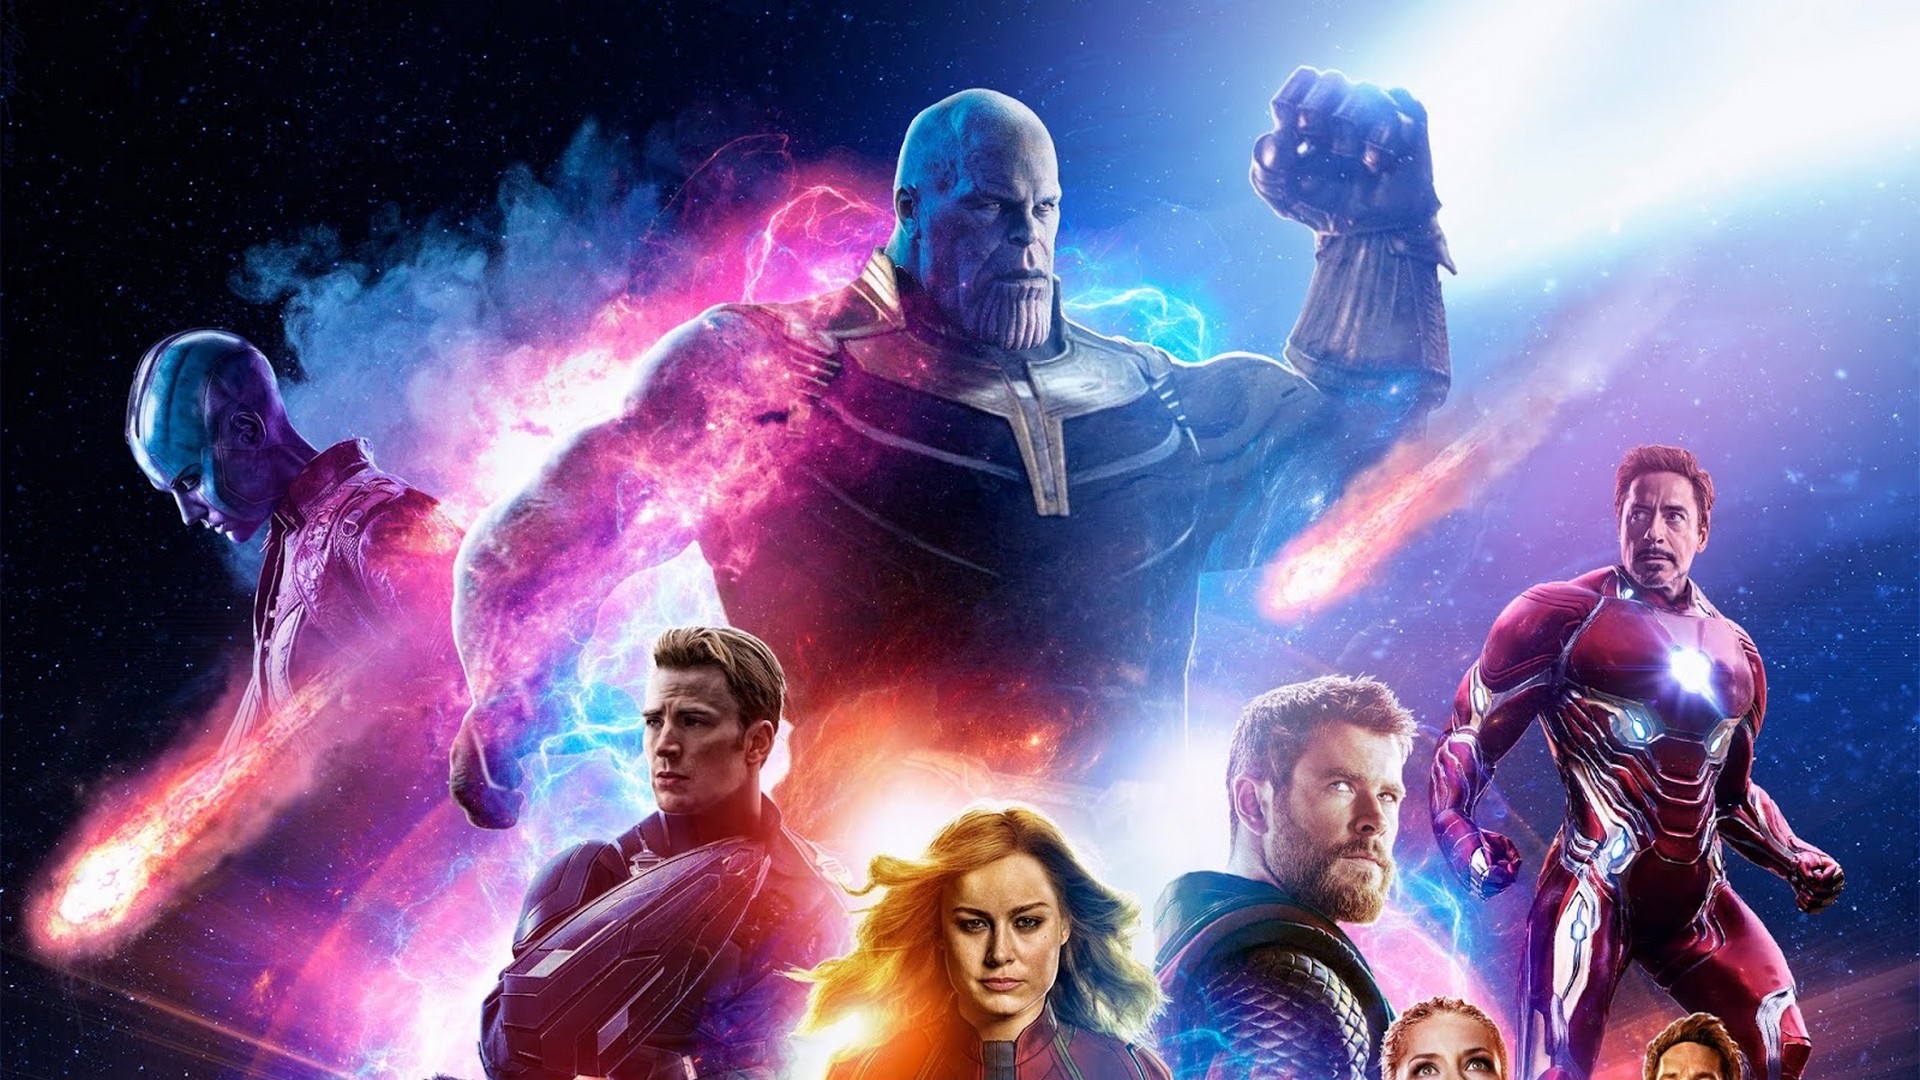 Avengers Endgame 2019 Movie Wallpaper with high-resolution 1920x1080 pixel. You can use this poster wallpaper for your Desktop Computers, Mac Screensavers, Windows Backgrounds, iPhone Wallpapers, Tablet or Android Lock screen and another Mobile device